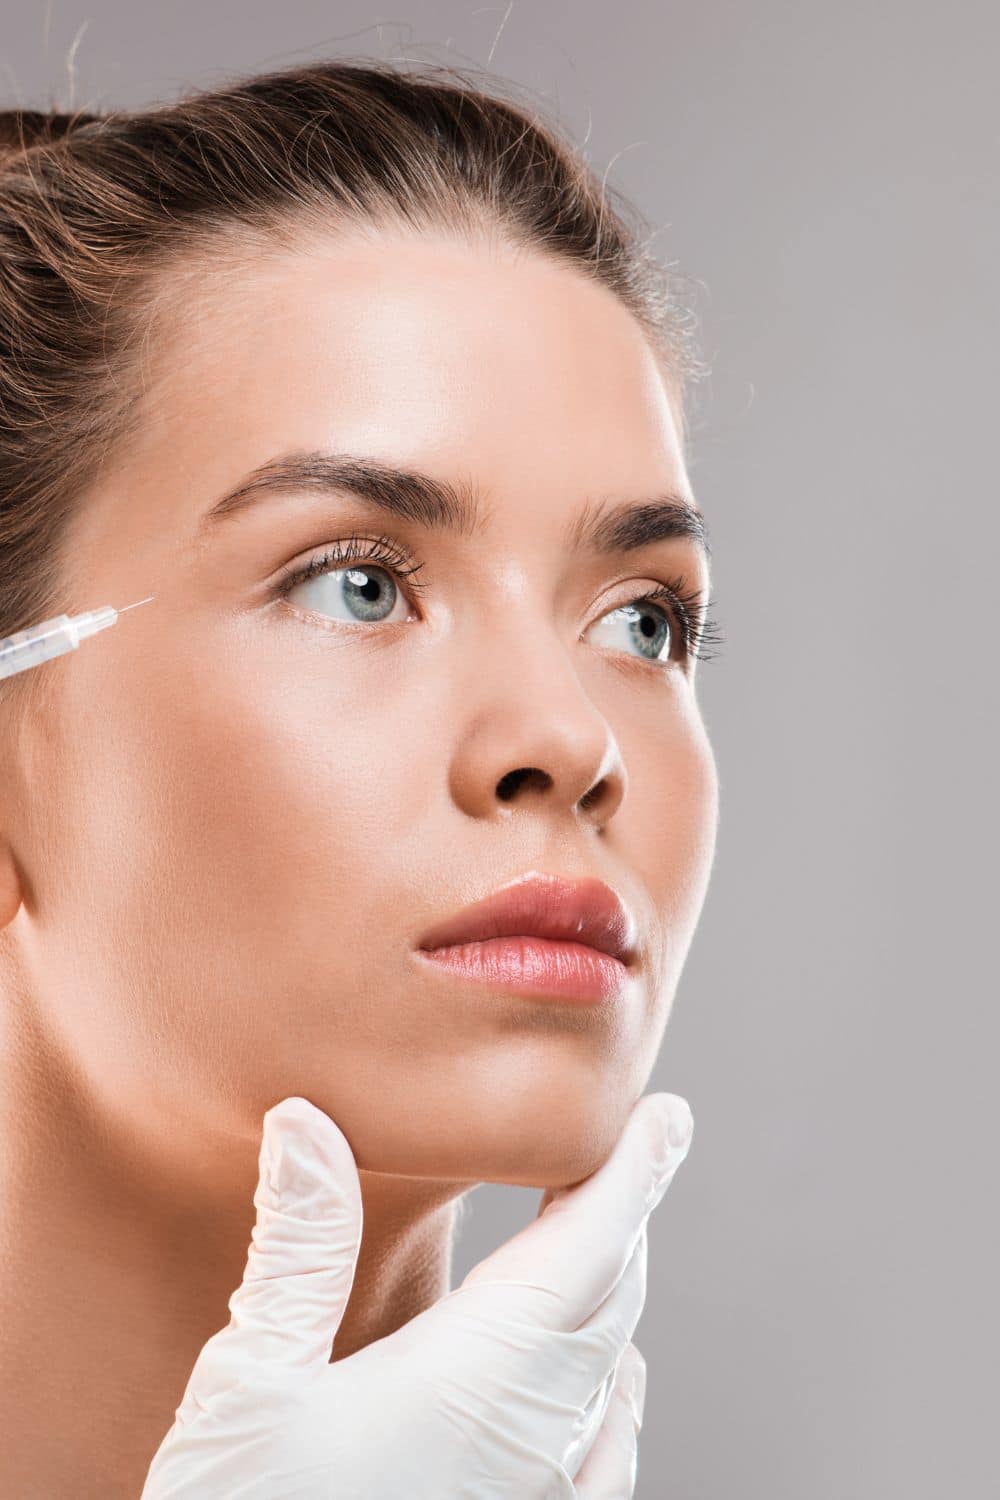 5 Possible Post-Botox Effects You Should Know About